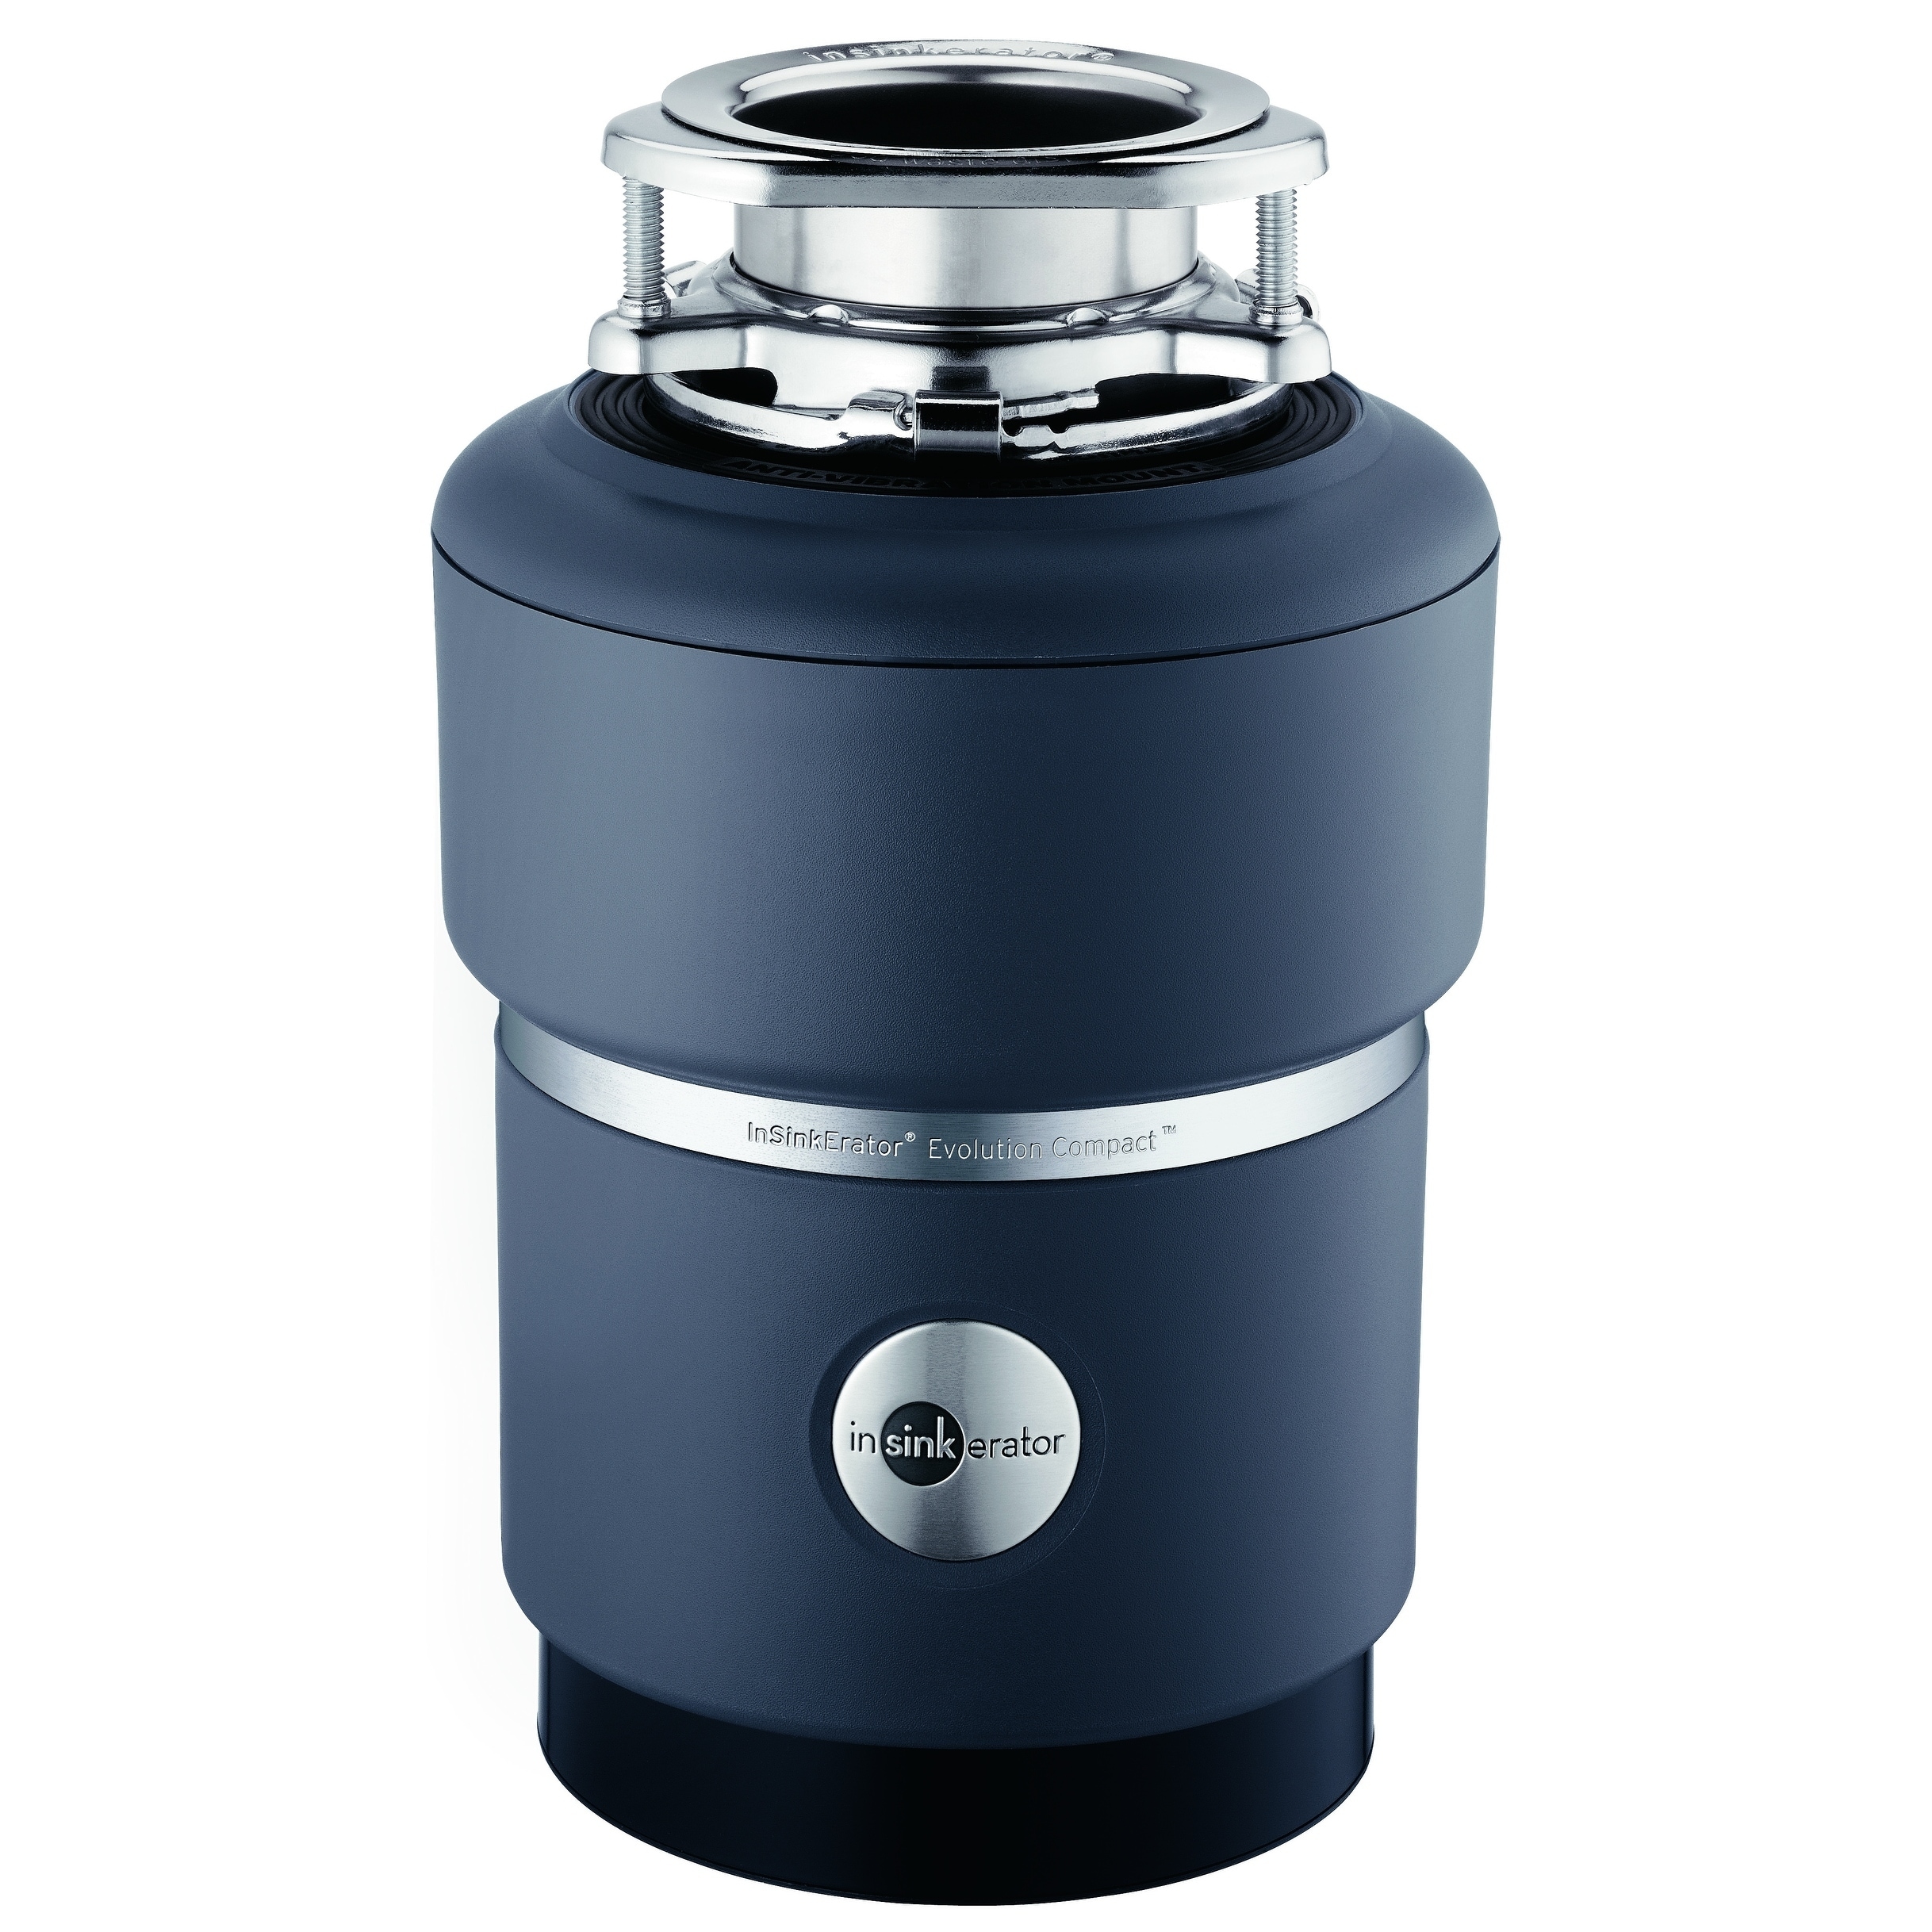 InSinkErator Evolution Compact Garbage Disposal HP with Cord, 3/4 (COMPACTW/ CORD) On Sale Bed Bath  Beyond 25896088